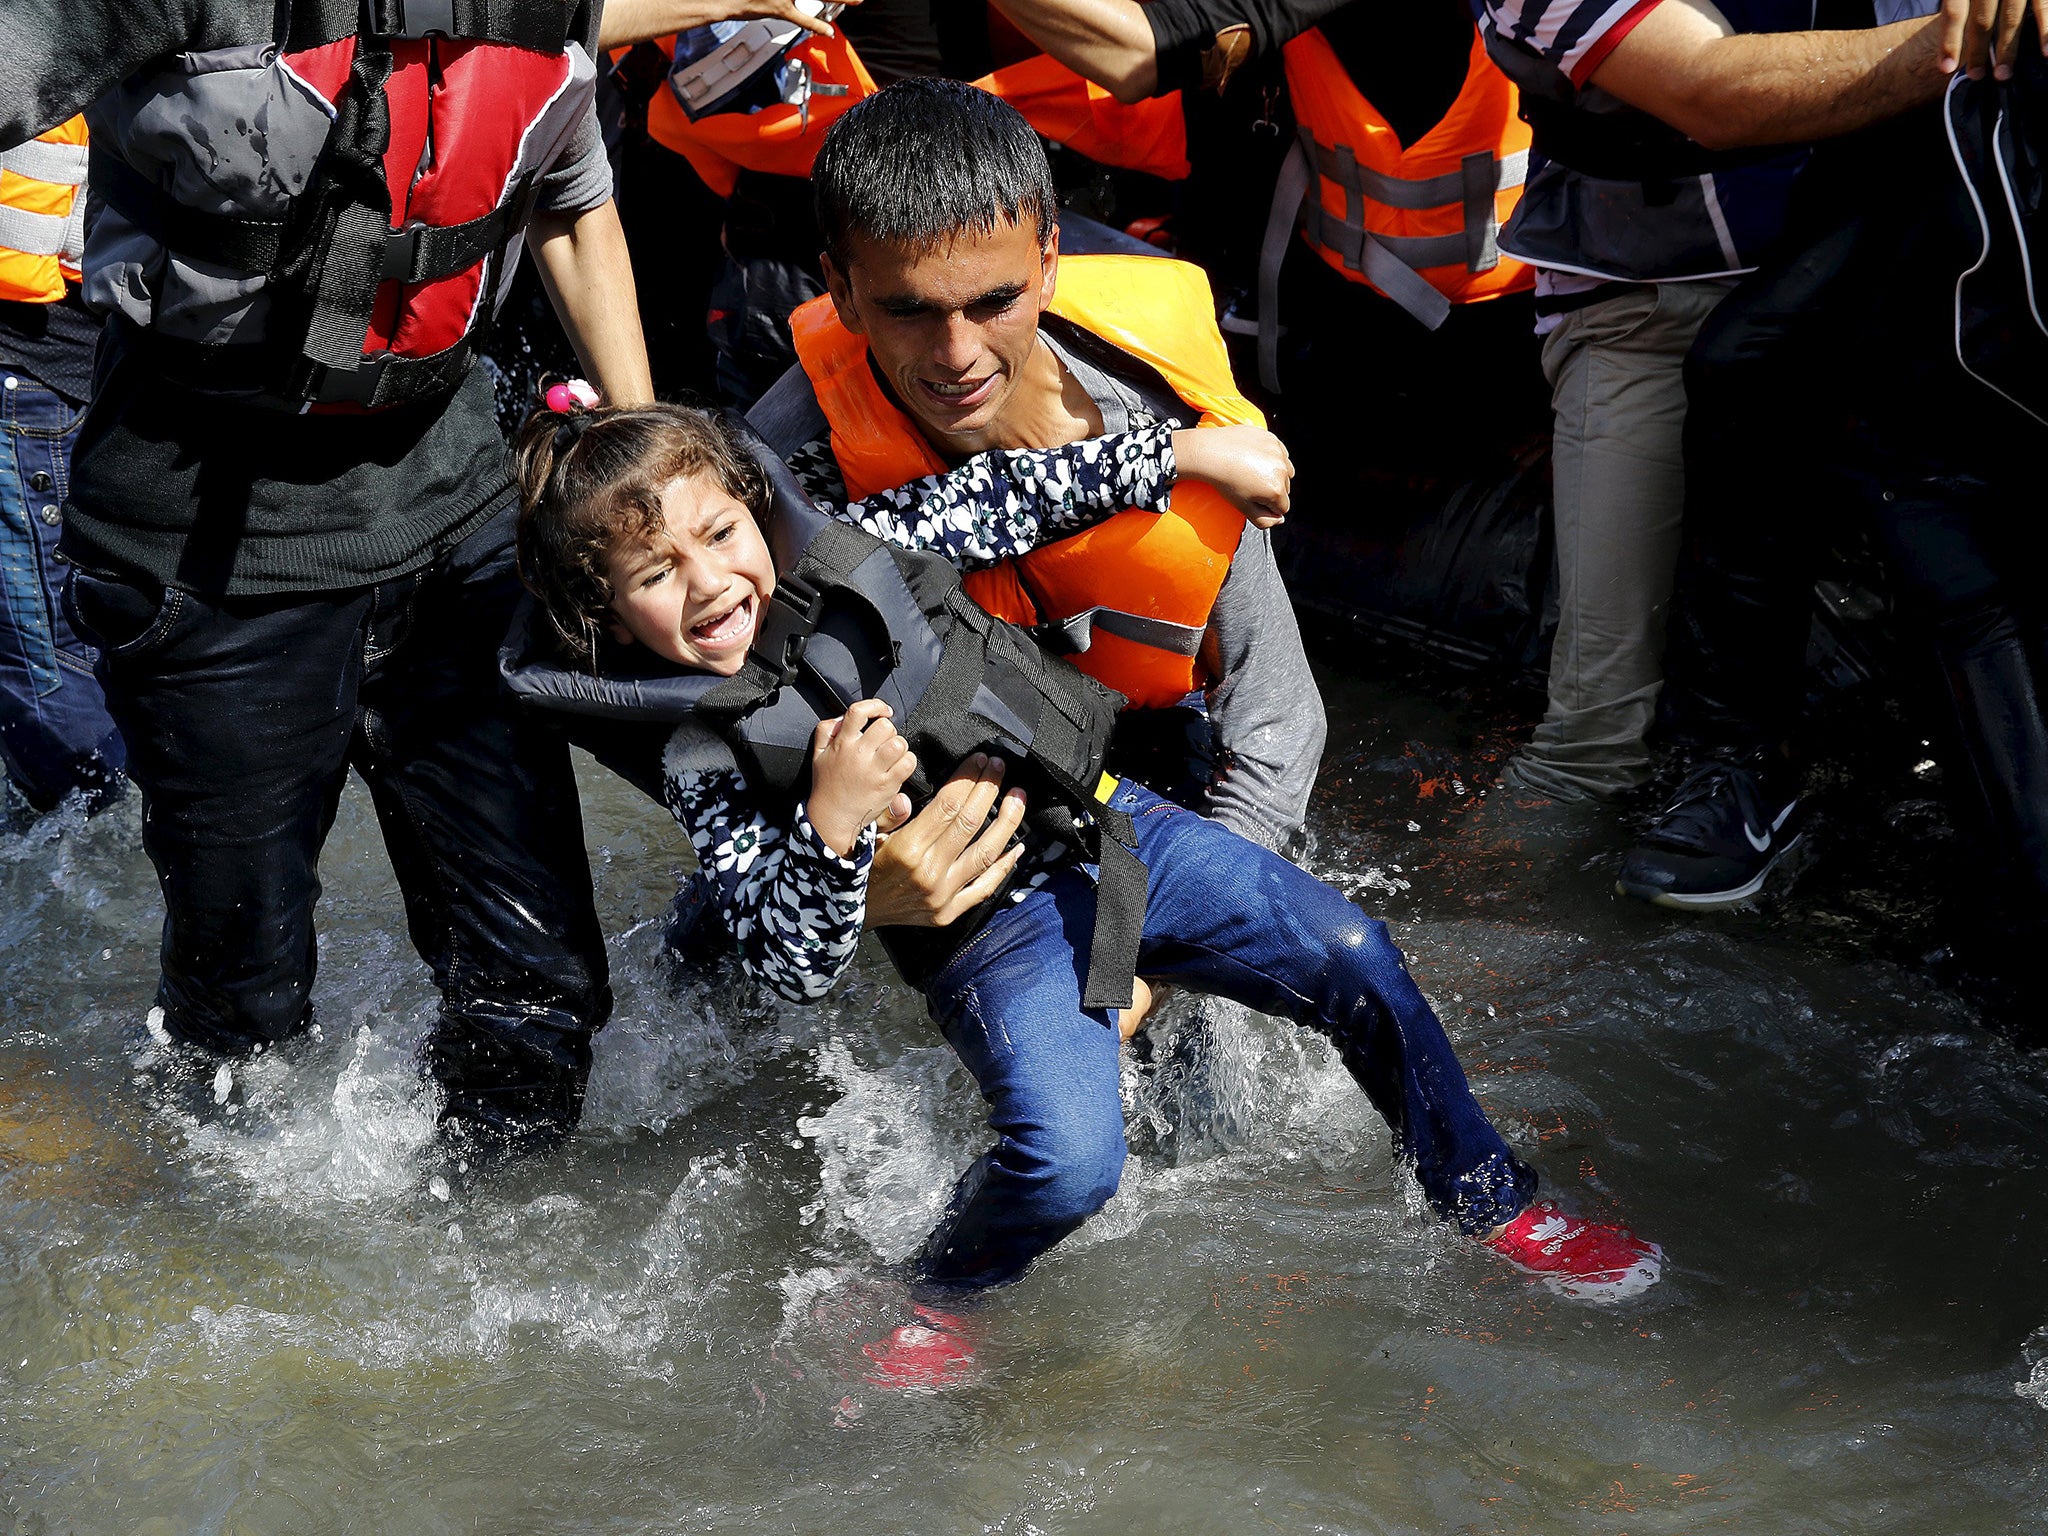 A Syrian refugee man struggles to carry his daughter off a dinghy at a beach after arriving on Lesbos